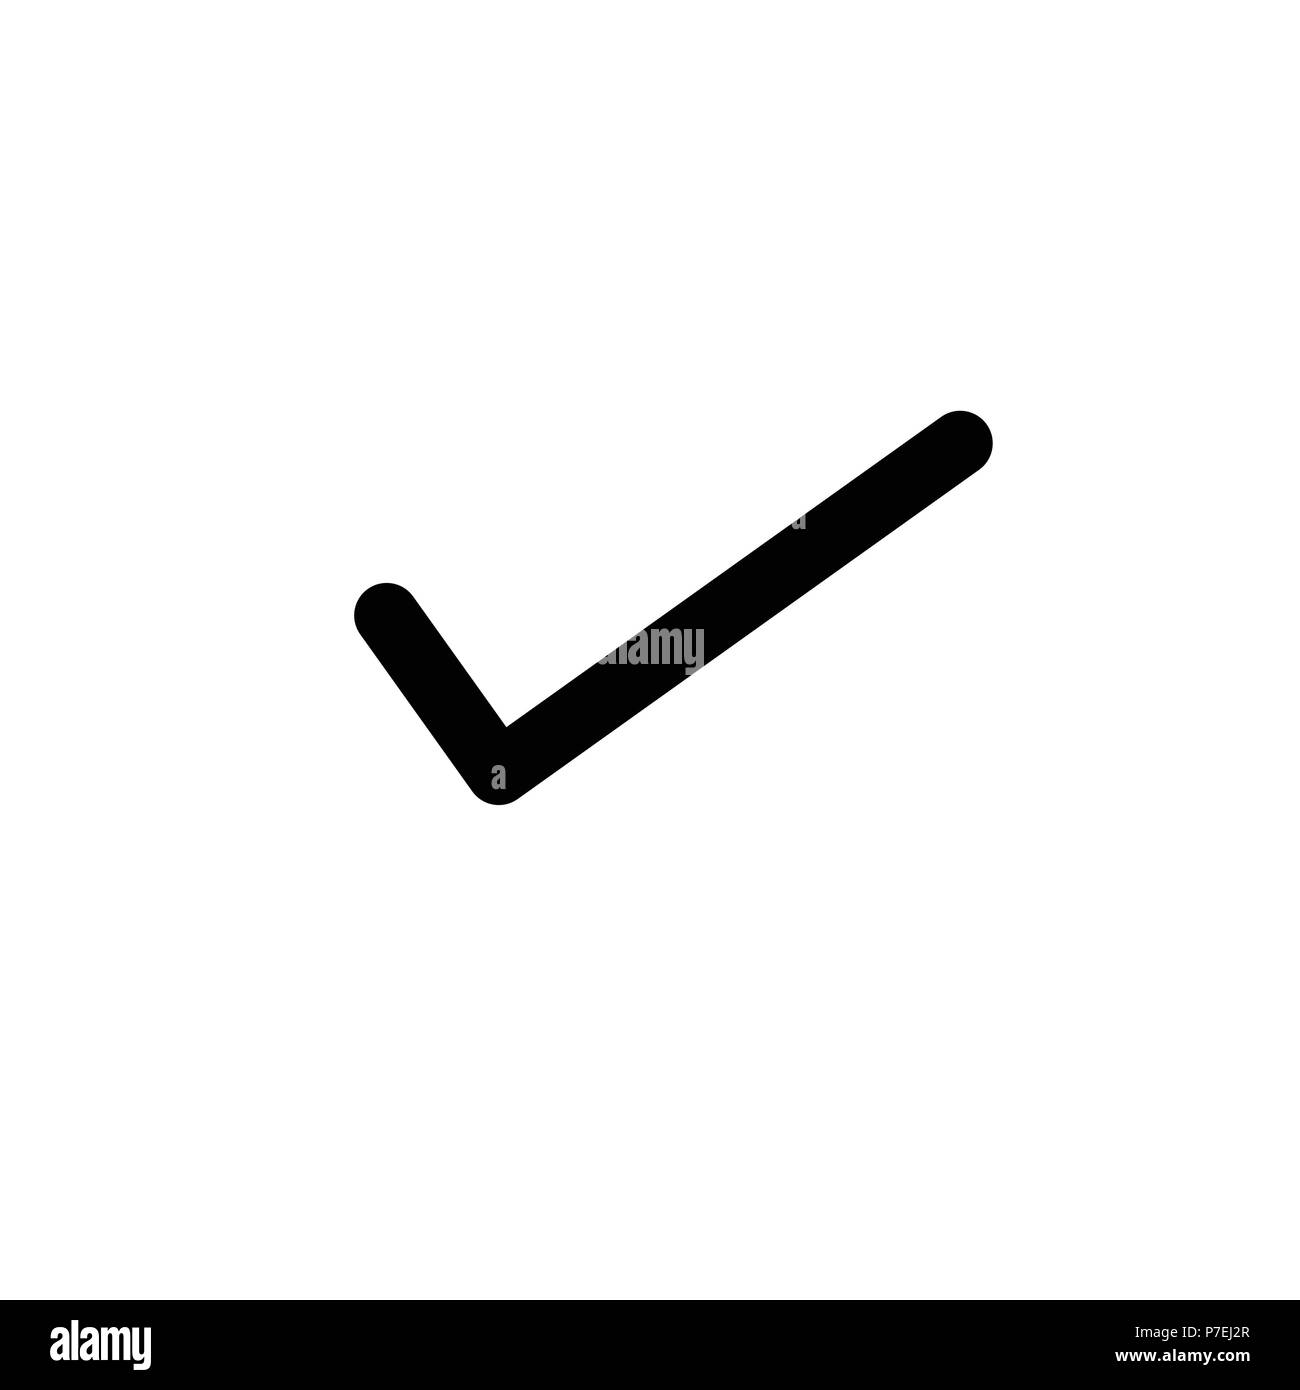 Check Mark Icon And Cross Sign Stock Illustration - Download Image Now -  Letter X, Check Mark, Cross Shape - iStock